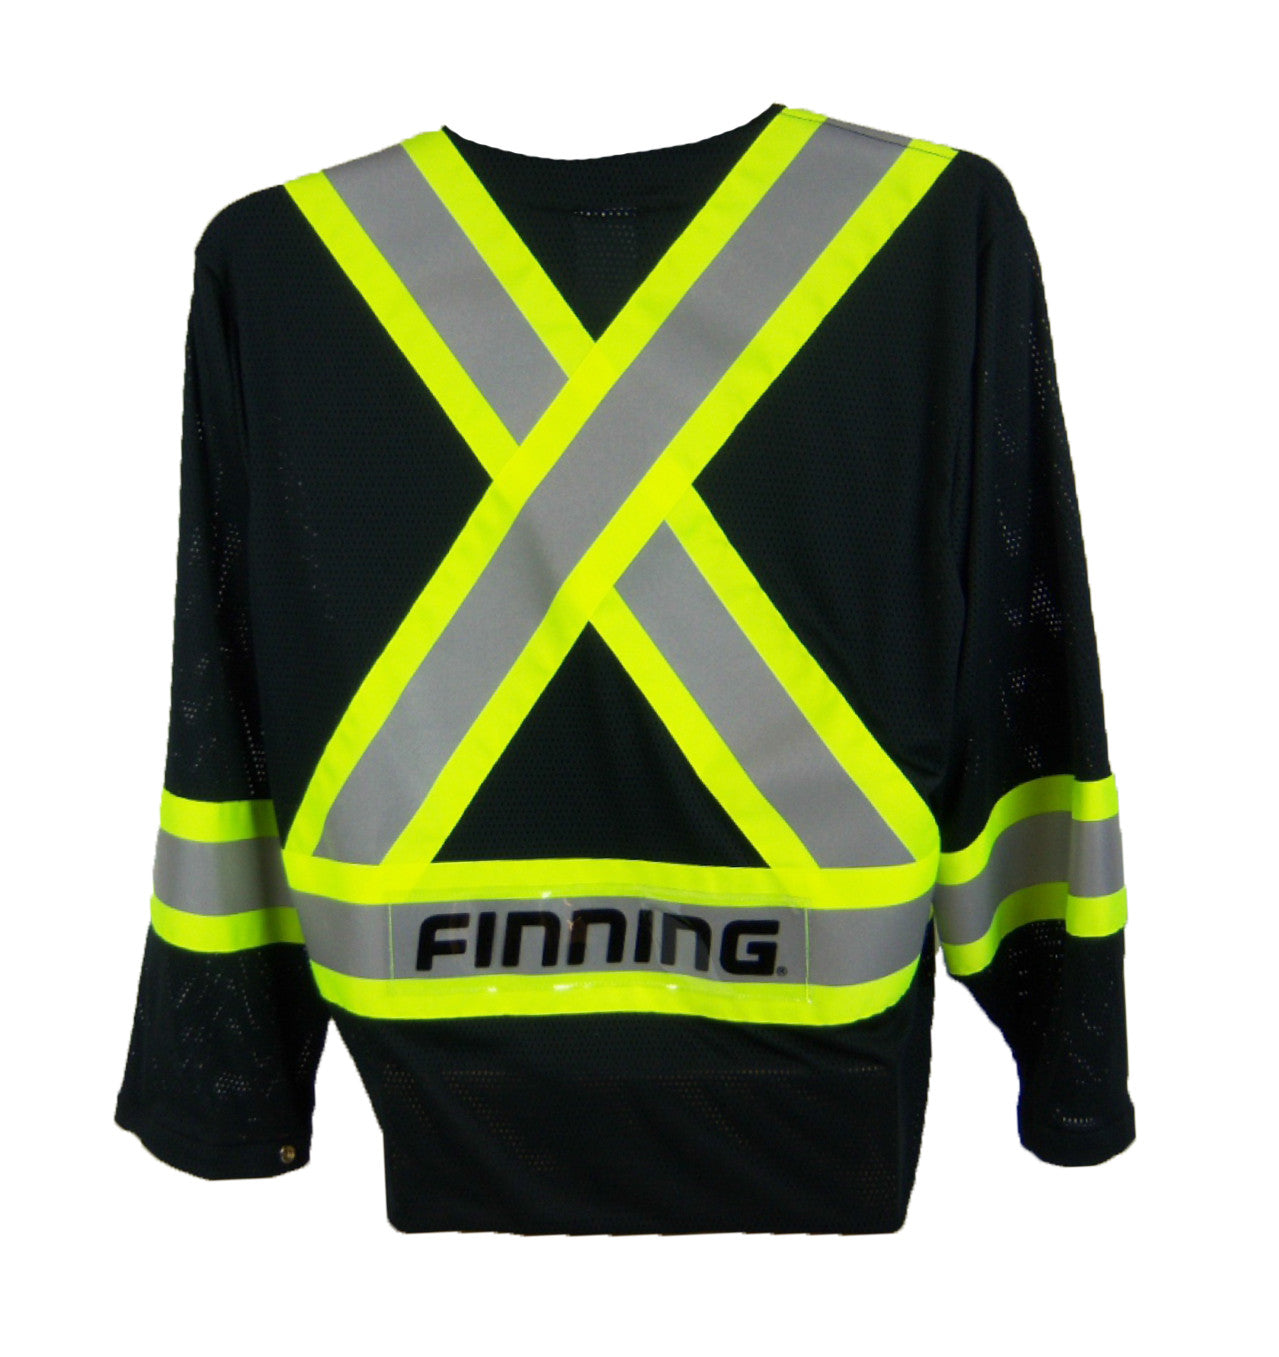 OVER2030.1 Black Mesh Jacket with hook/loop front closure - CSA Class 1 Level 2